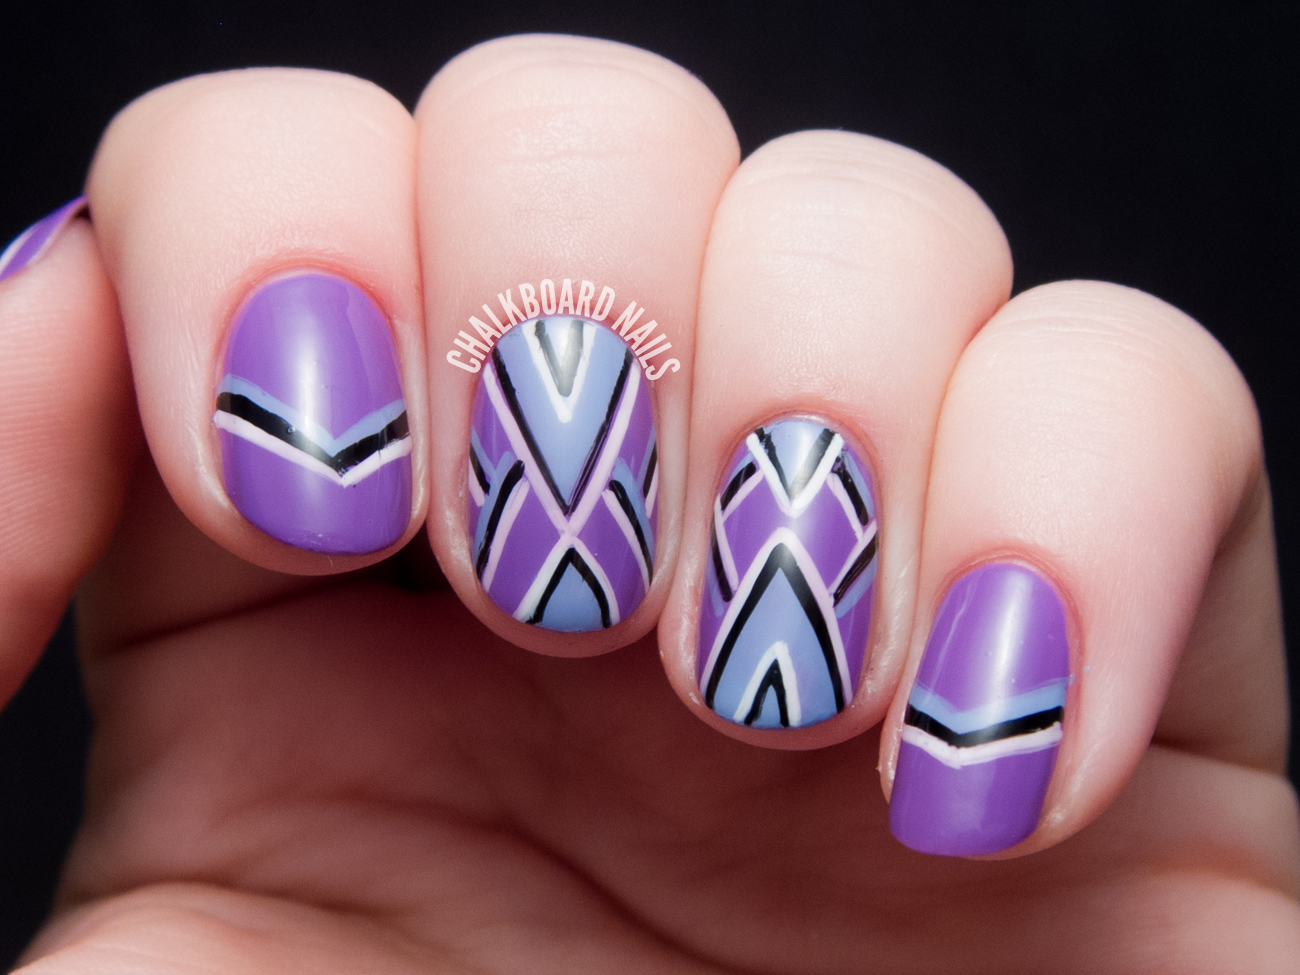 4. The Best Nail Polishes for Creating Chevron Lines - wide 1